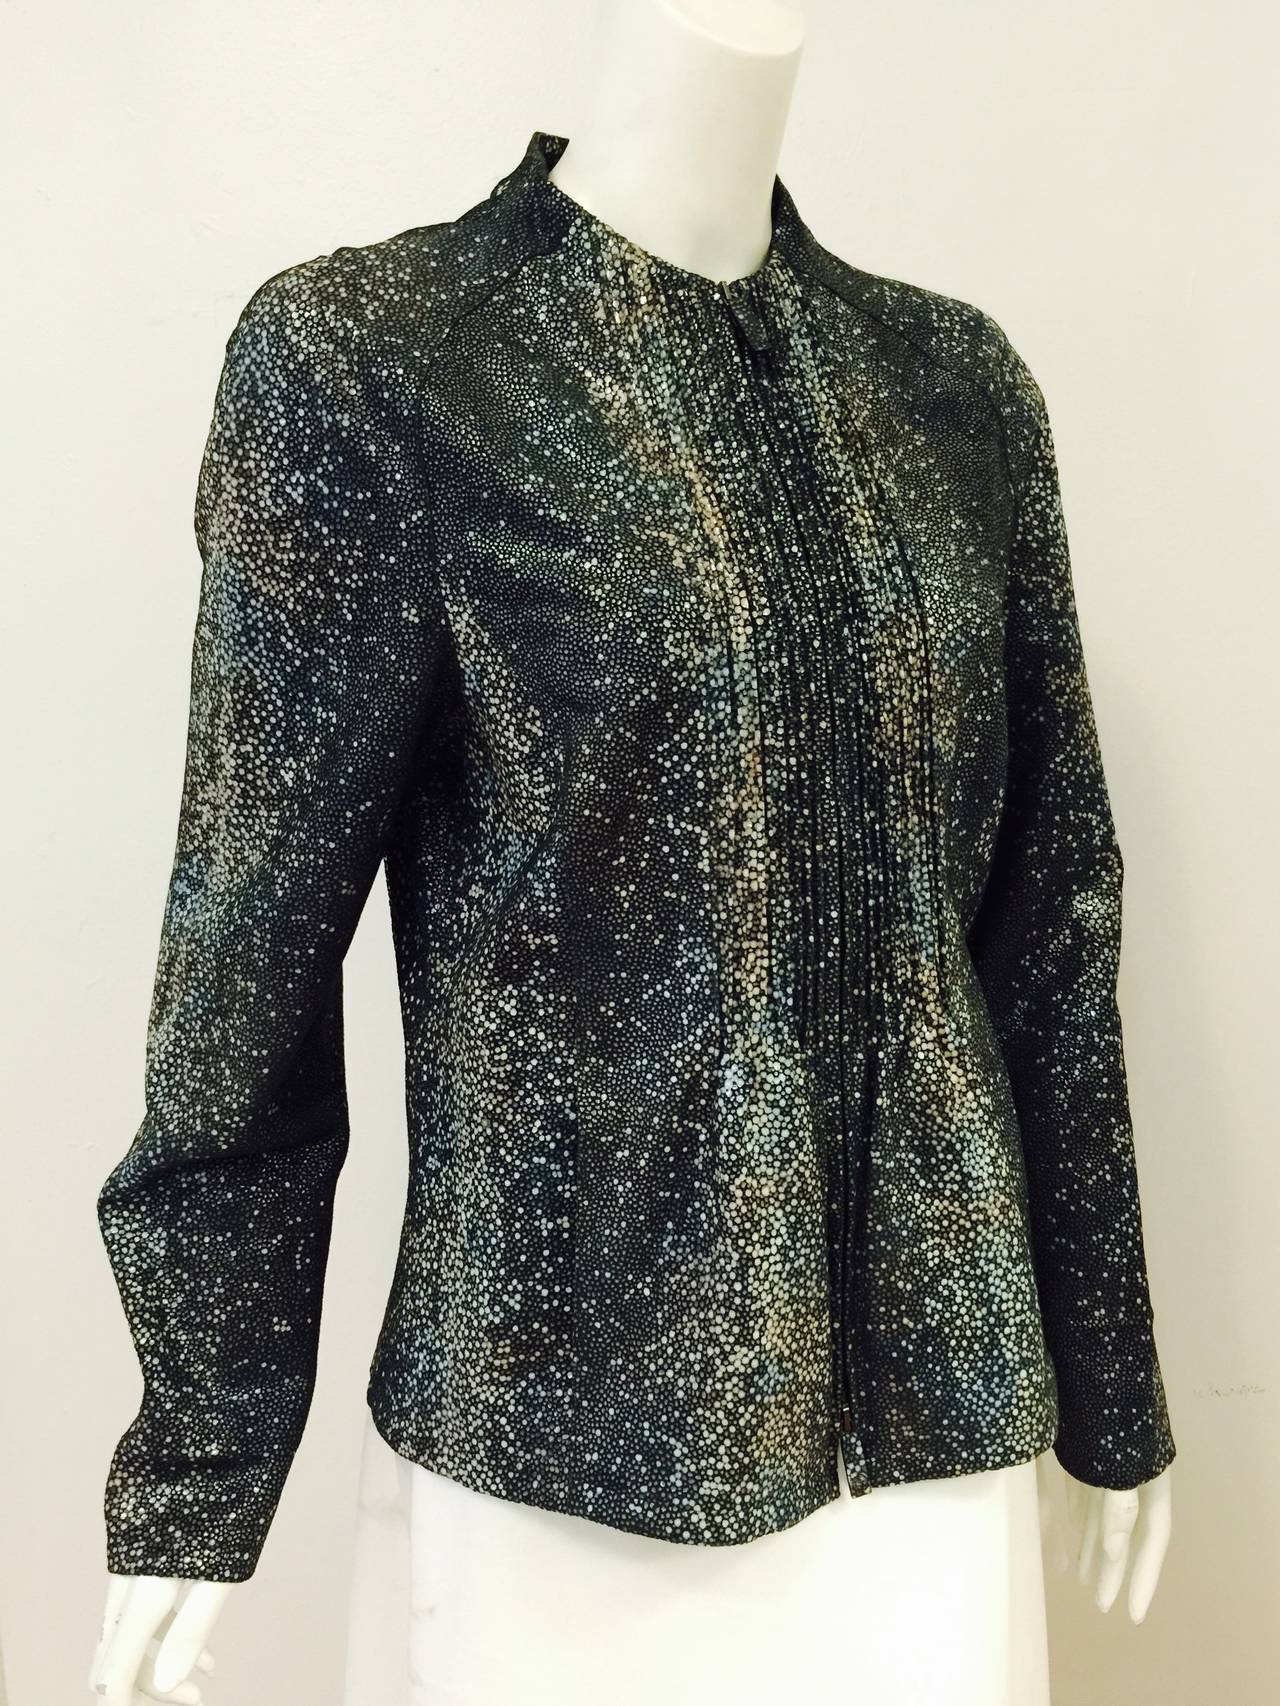 Limited Edition Shagreen Lambskin Jacket is worthy of Giorgio Armani's archives!  Crafted from the most supple lambskin, jacket will awe all admirers.  Truly magnificent old world leather crafting techniques must be seen to be believed!  Exterior